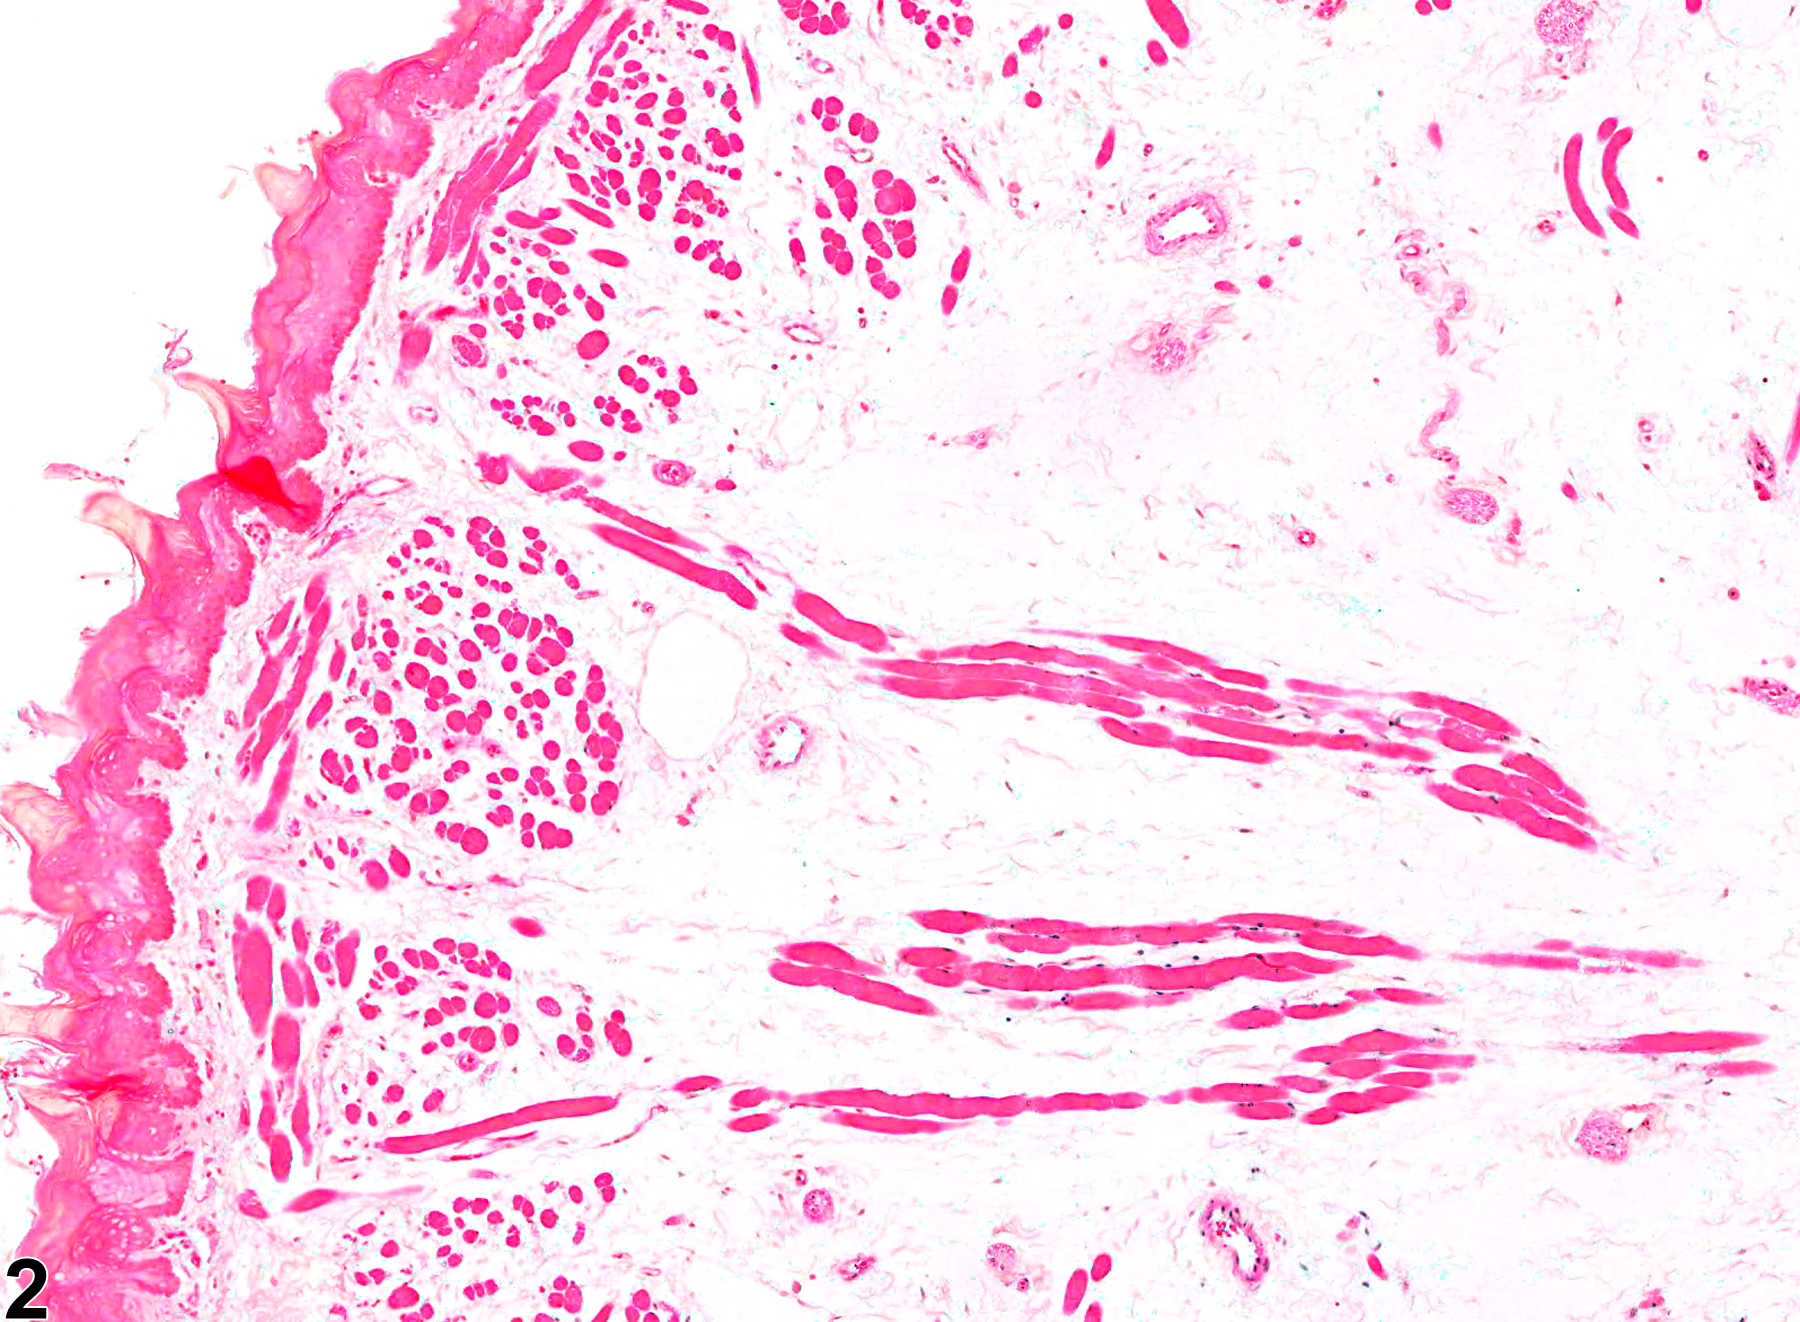 Image of edema in the tongue from a male F344/N rat in a chronic study